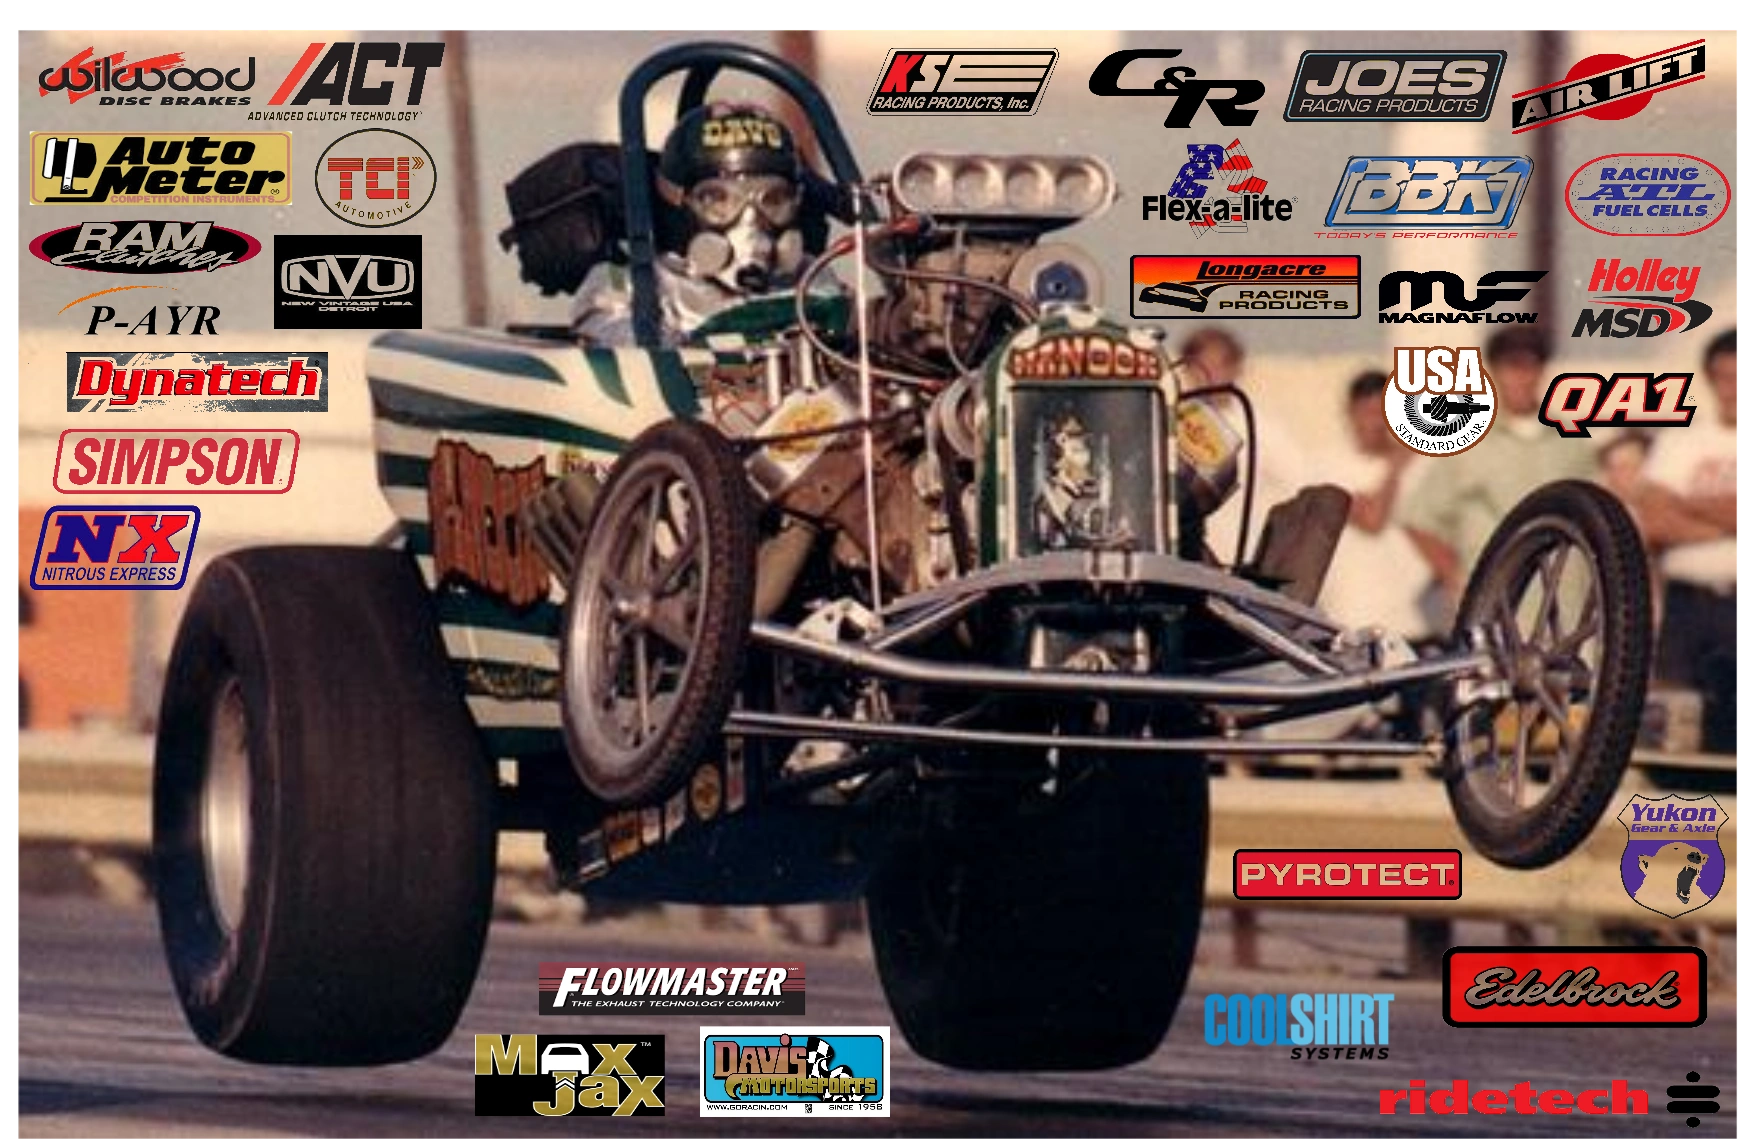 Altered dragster doing a 4 wheel wheelstand, background racing parts and equipment company logos